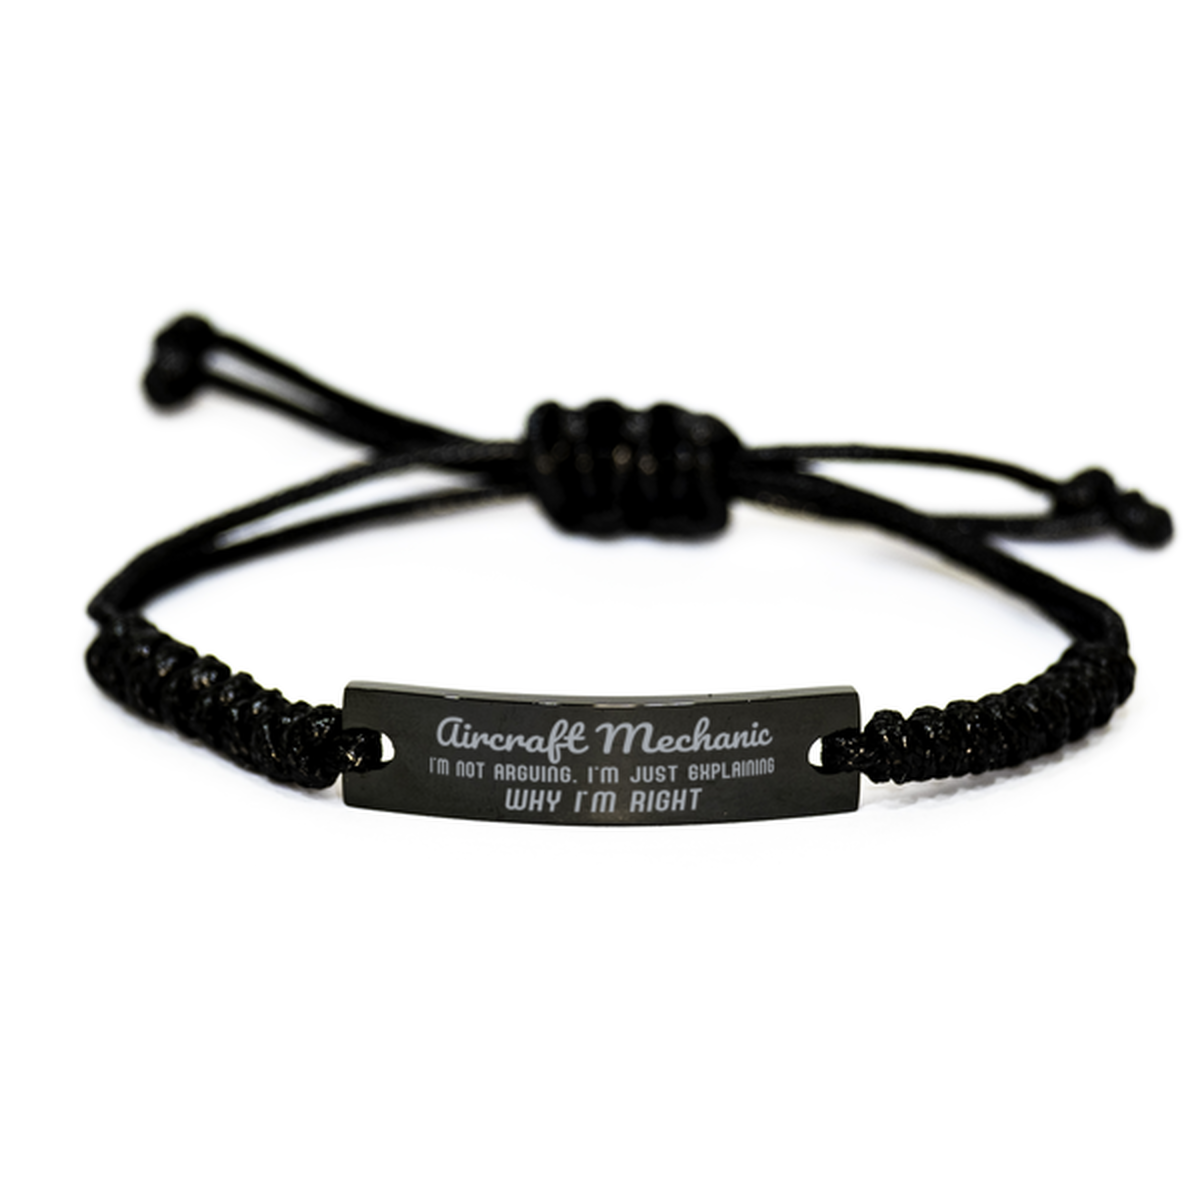 Aircraft Mechanic I'm not Arguing. I'm Just Explaining Why I'm RIGHT Black Rope Bracelet, Funny Saying Quote Aircraft Mechanic Gifts For Aircraft Mechanic Graduation Birthday Christmas Gifts for Men Women Coworker